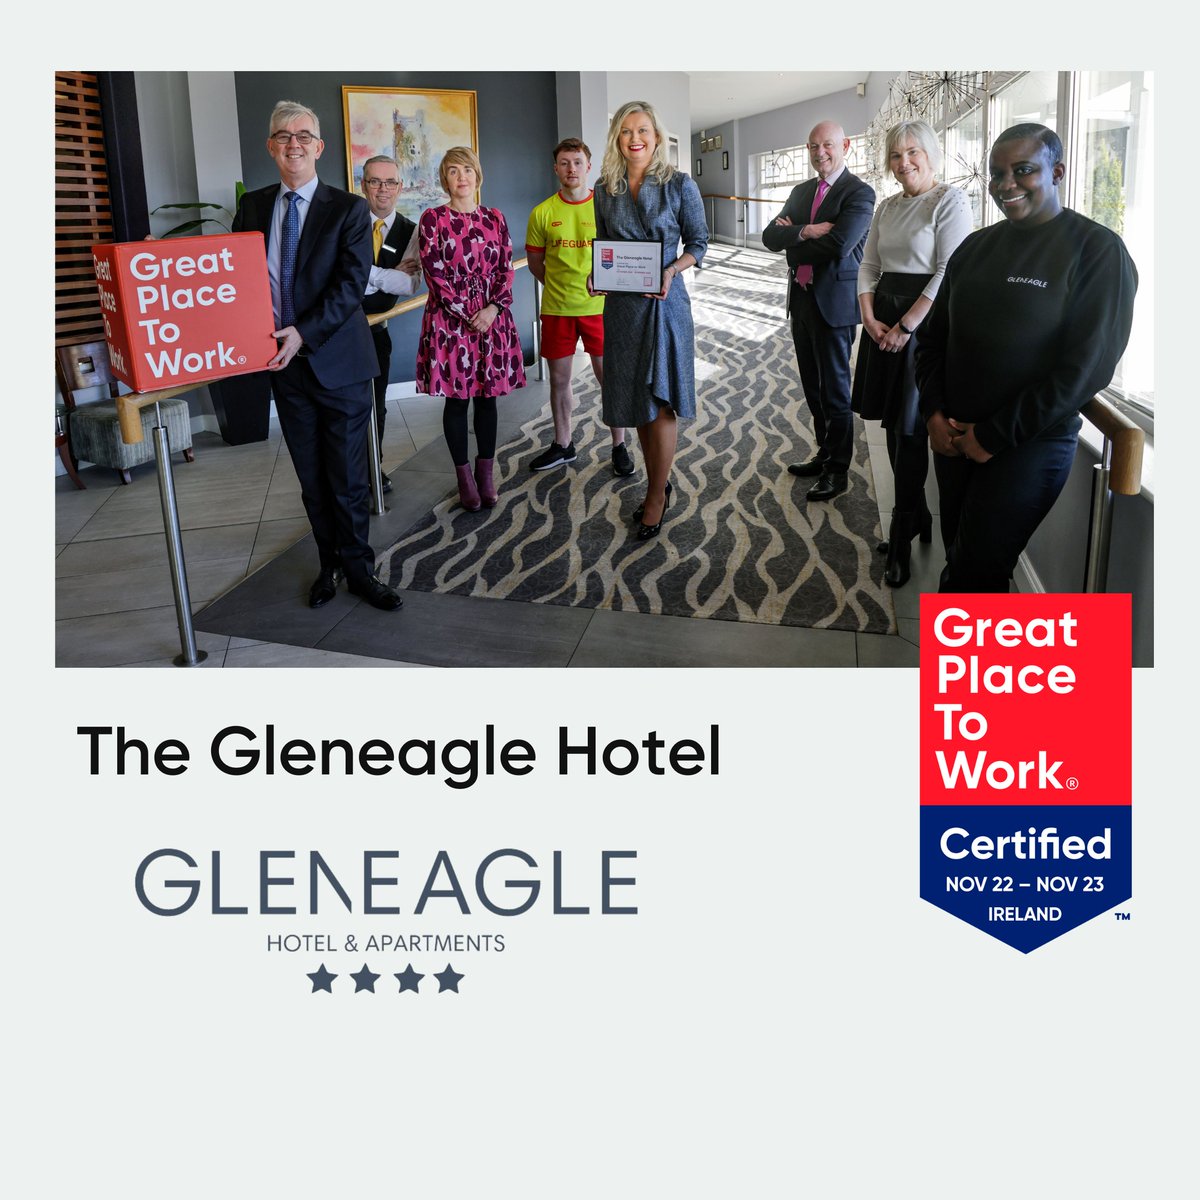 We are delighted to have been officially certified as a #greatplacetowork 

Learn More: bit.ly/3HSgbvE

#gptw #gptwcertified #greatplacetoworkcertified #certification #greatworkplace #certifiedgreat